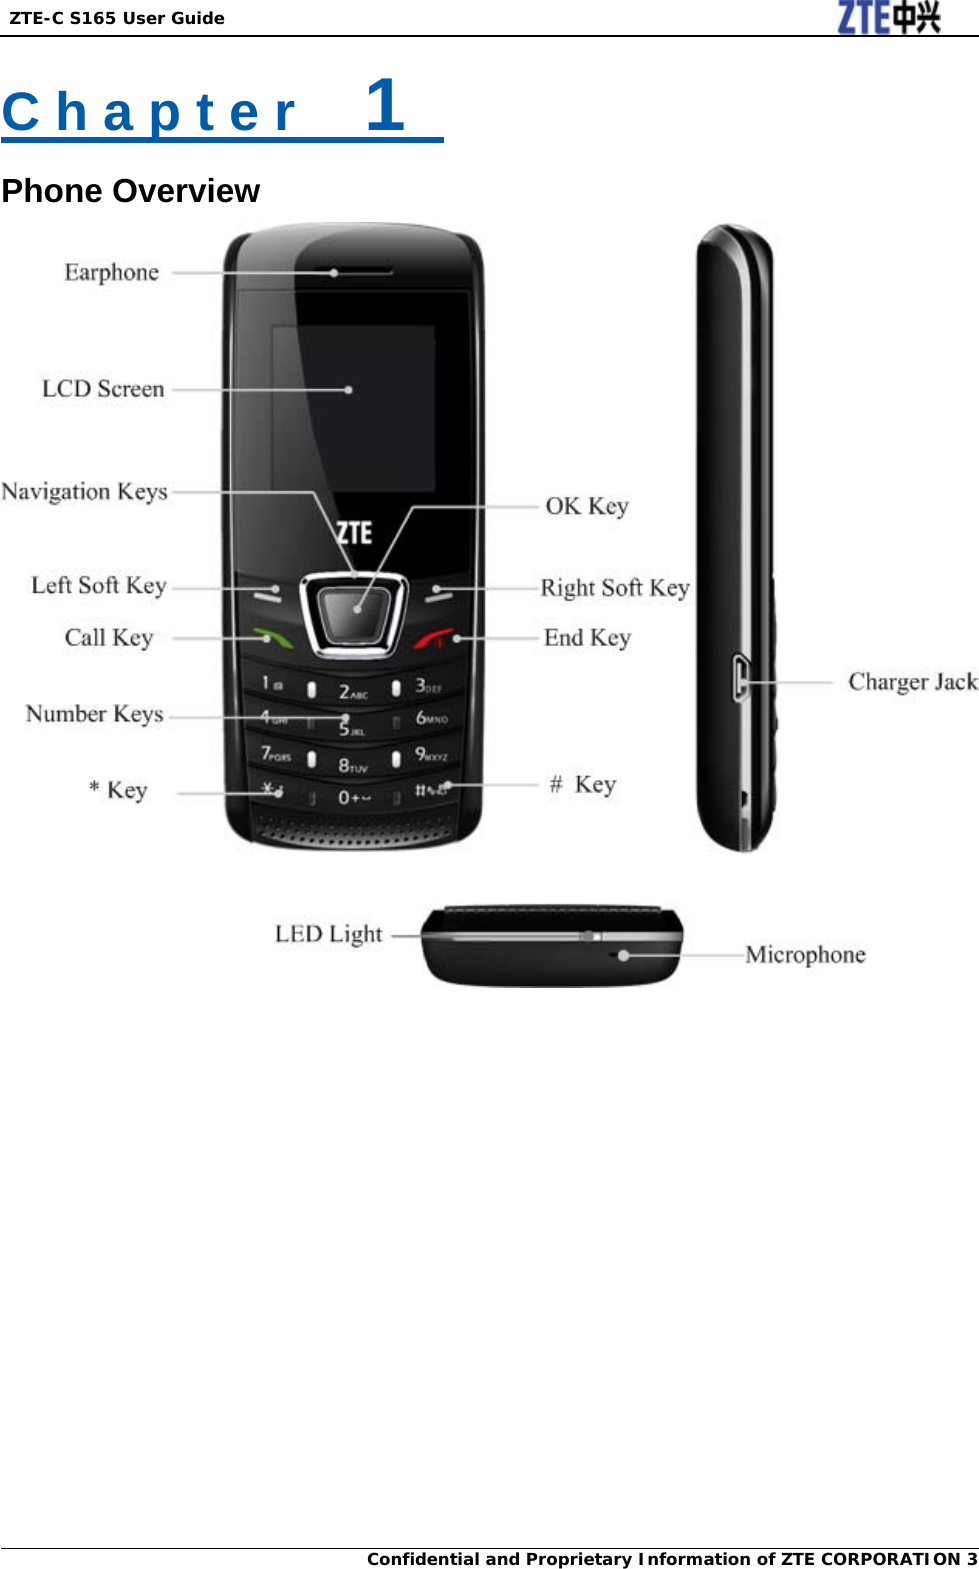  ZTE-C S165 User Guide Confidential and Proprietary Information of ZTE CORPORATION 3C h a p t e r    1   Phone Overview   